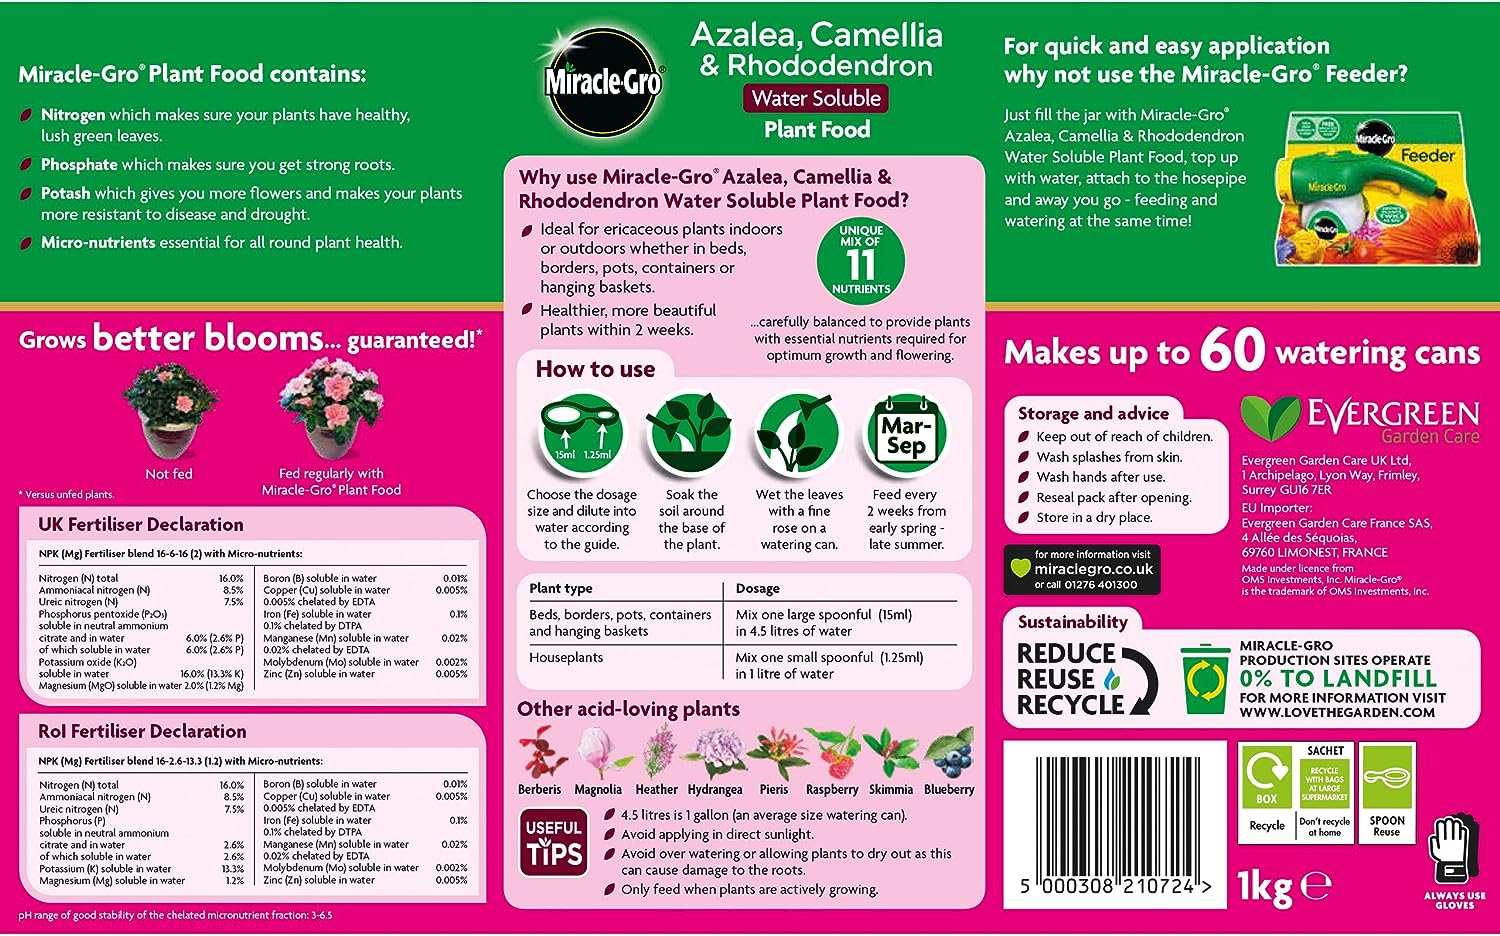 Miracle-Gro Azalea, Camellia & Rhododendron Water Soluble Plant Food 1kg